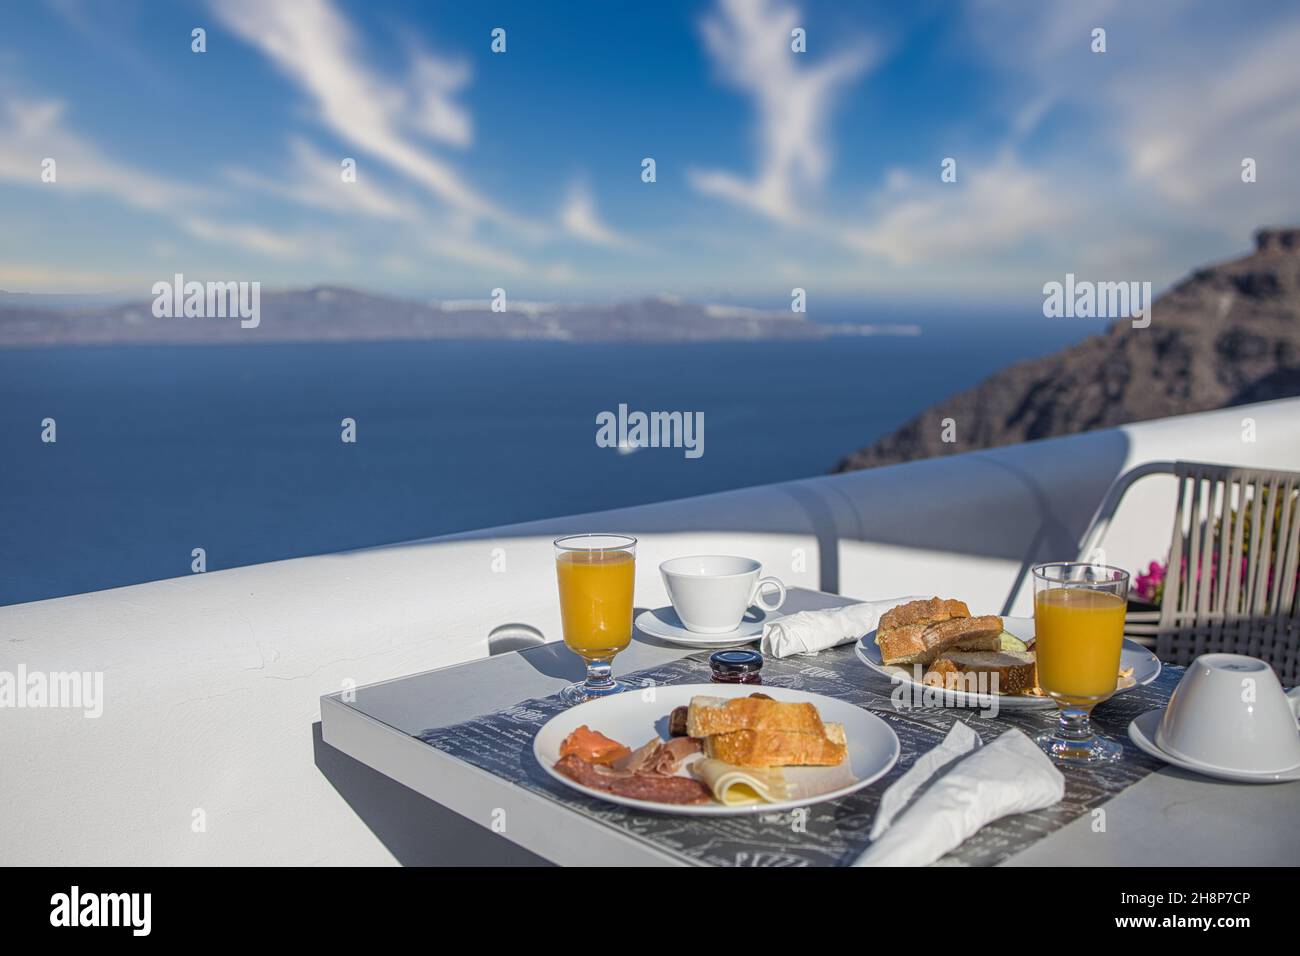 Breakfast table romantic view under idyllic blue sky sea. Perfect luxury breakfast food table for two outdoors. Amazing caldera view on Santorini Oia Stock Photo